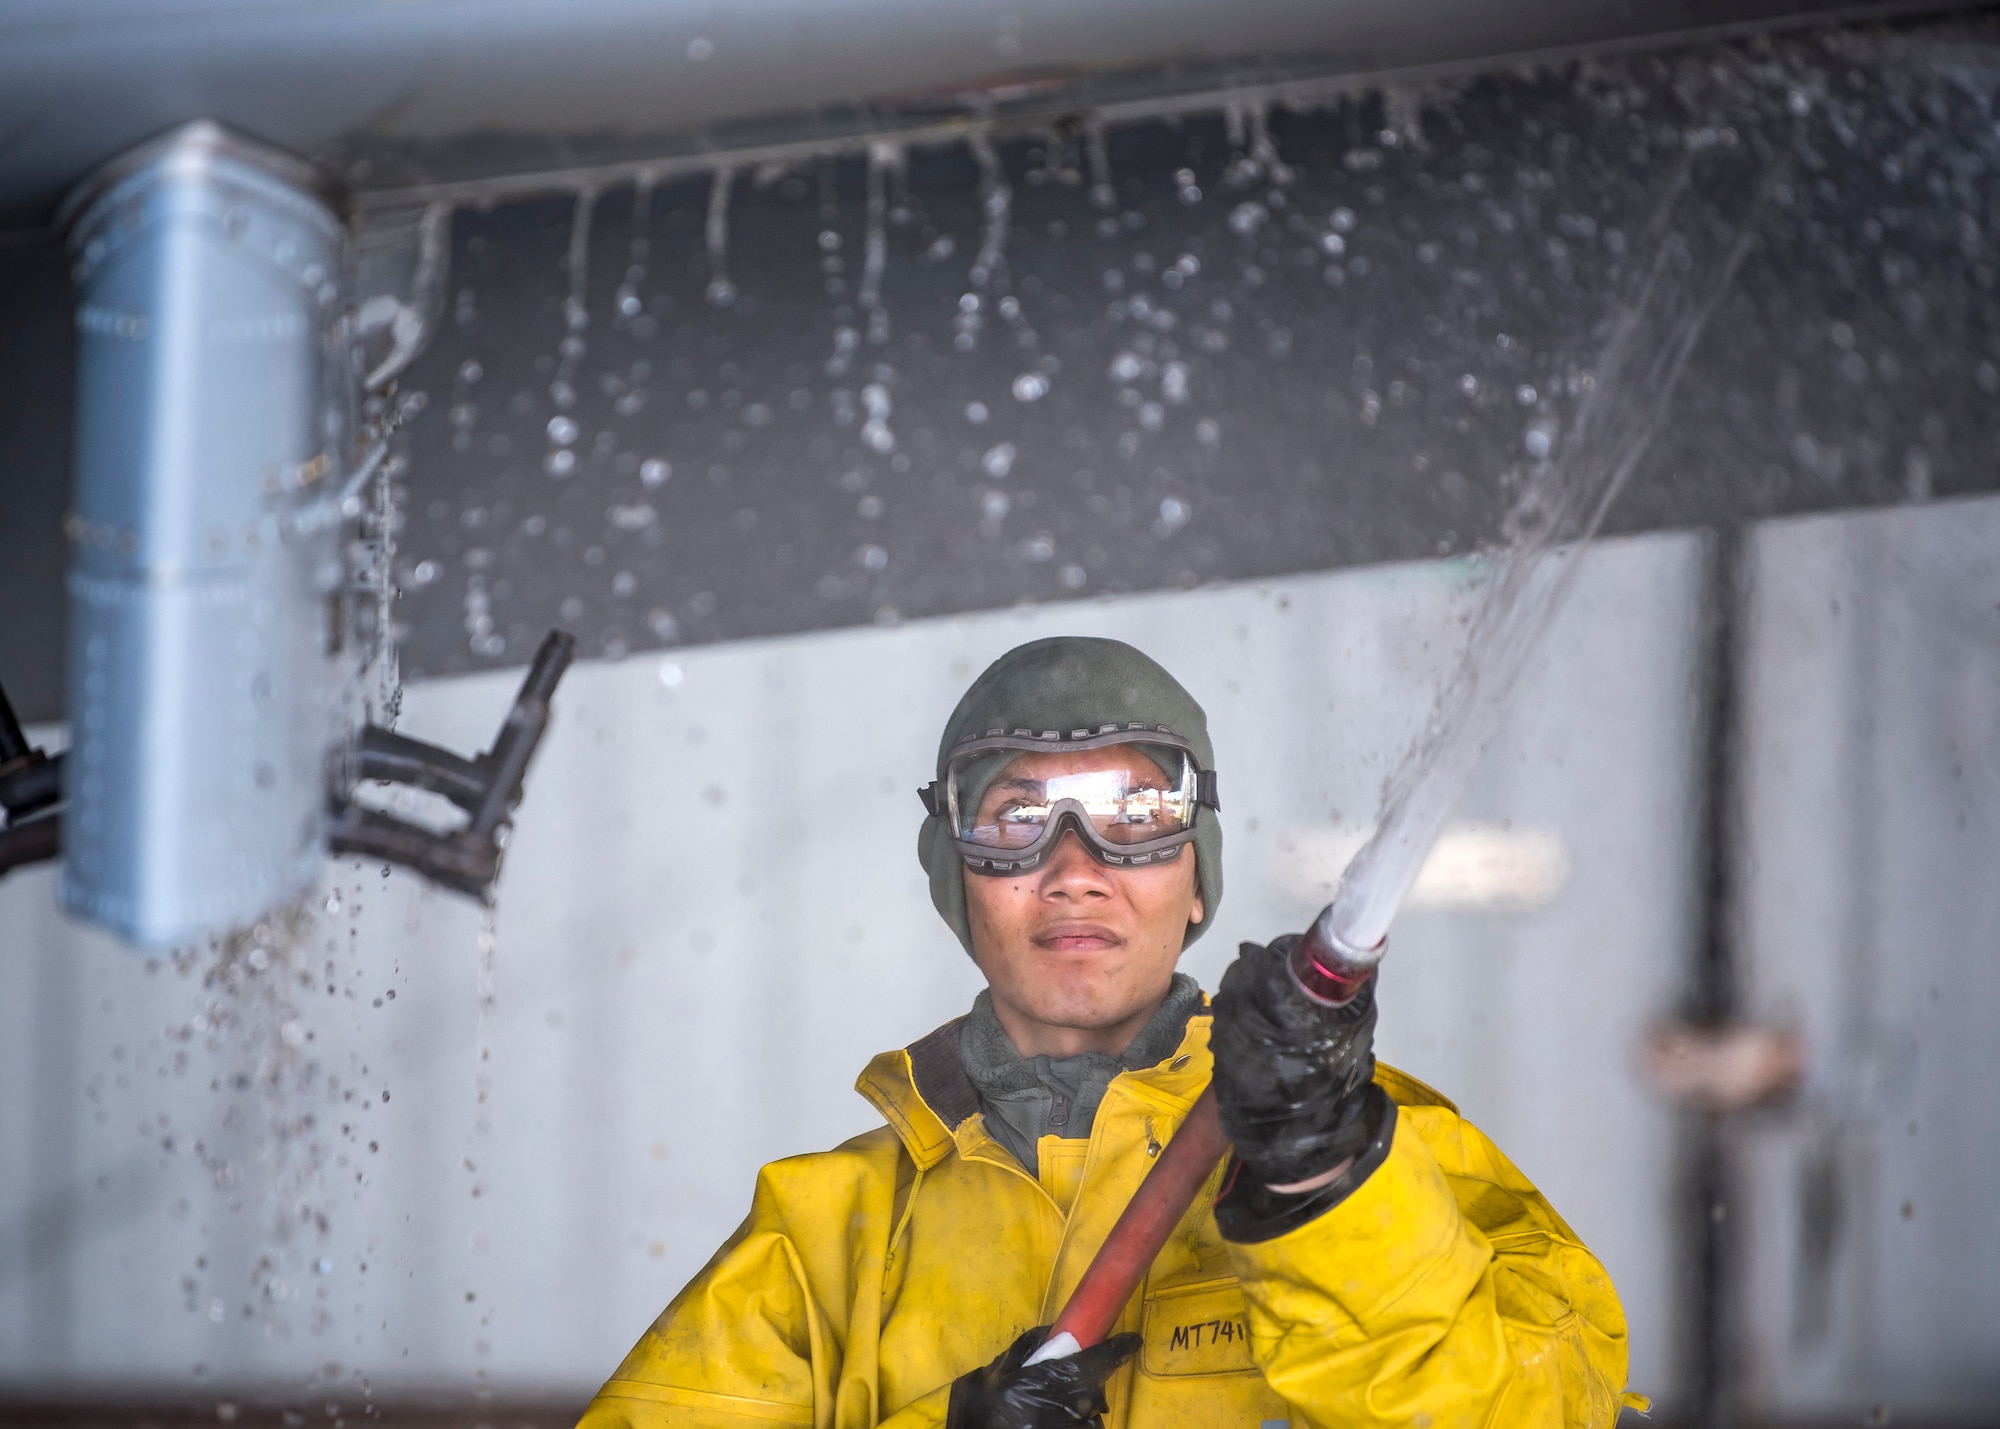 Airman 1st Class Anjo Betitia, 74th Aircraft Maintenance Unit crew chief, sprays the wing of an A-10C Thunderbolt II, Feb. 25, 2019, at Moody Air Force Base, Ga. A-10s require a wash every 180 days, or 1,000 flying hours, in order to control corrosion and grease build up within the aircraft. (U.S. Air Force photo by Airman 1st Class Eugene Oliver)